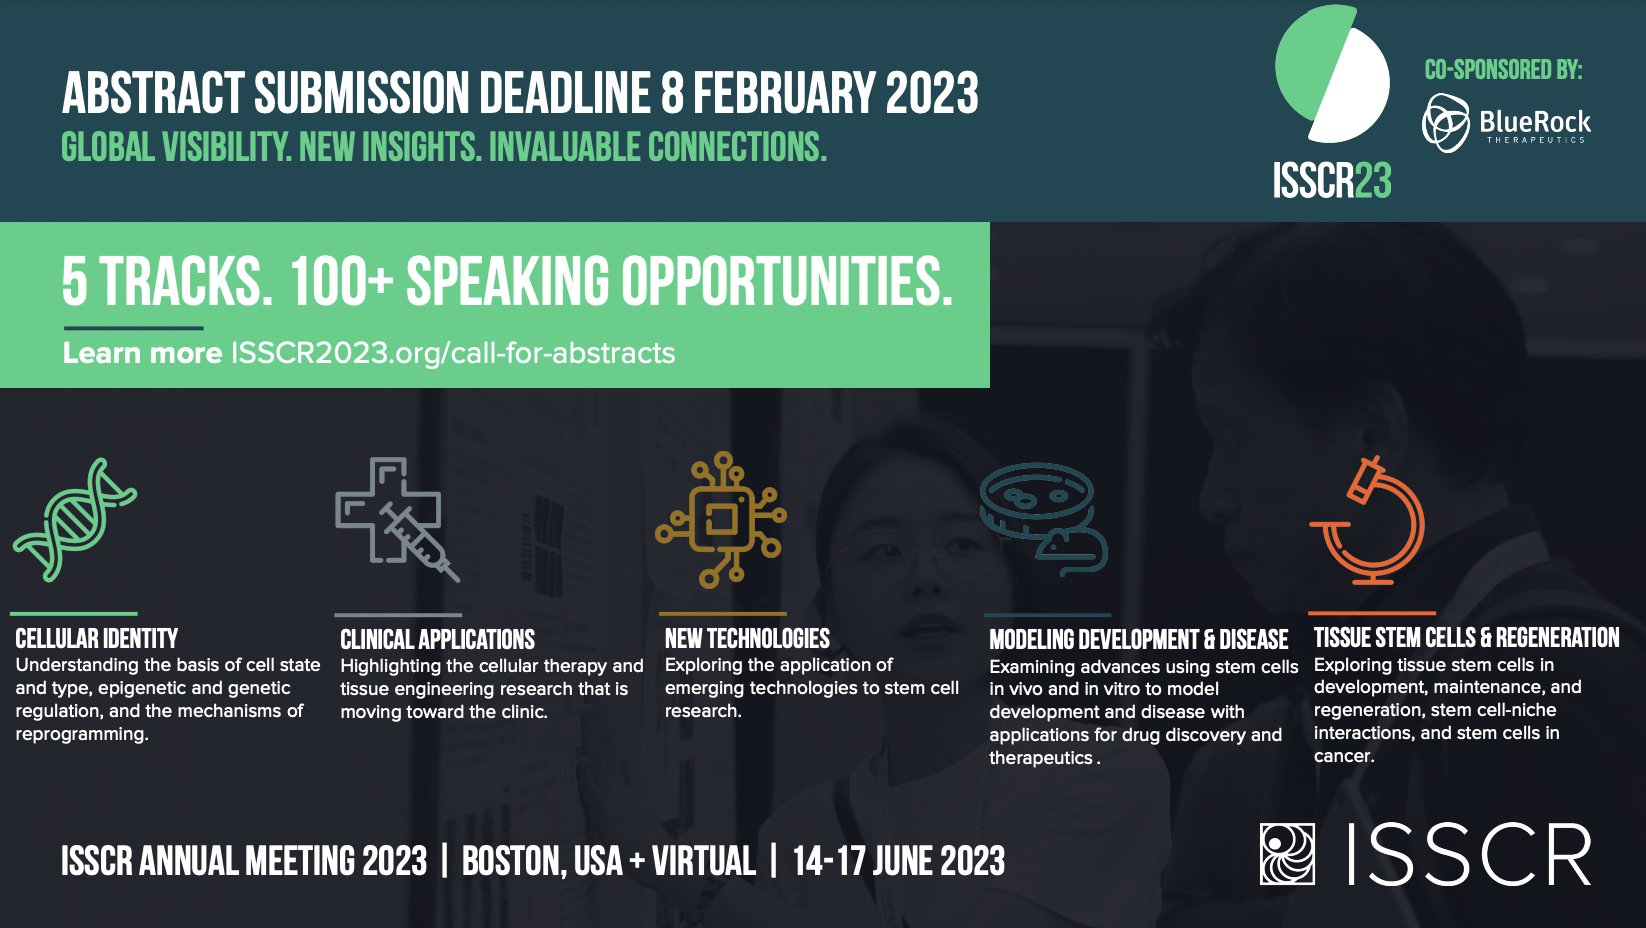 Abstract submission for the ISSCR 2023 Boston meeting are open